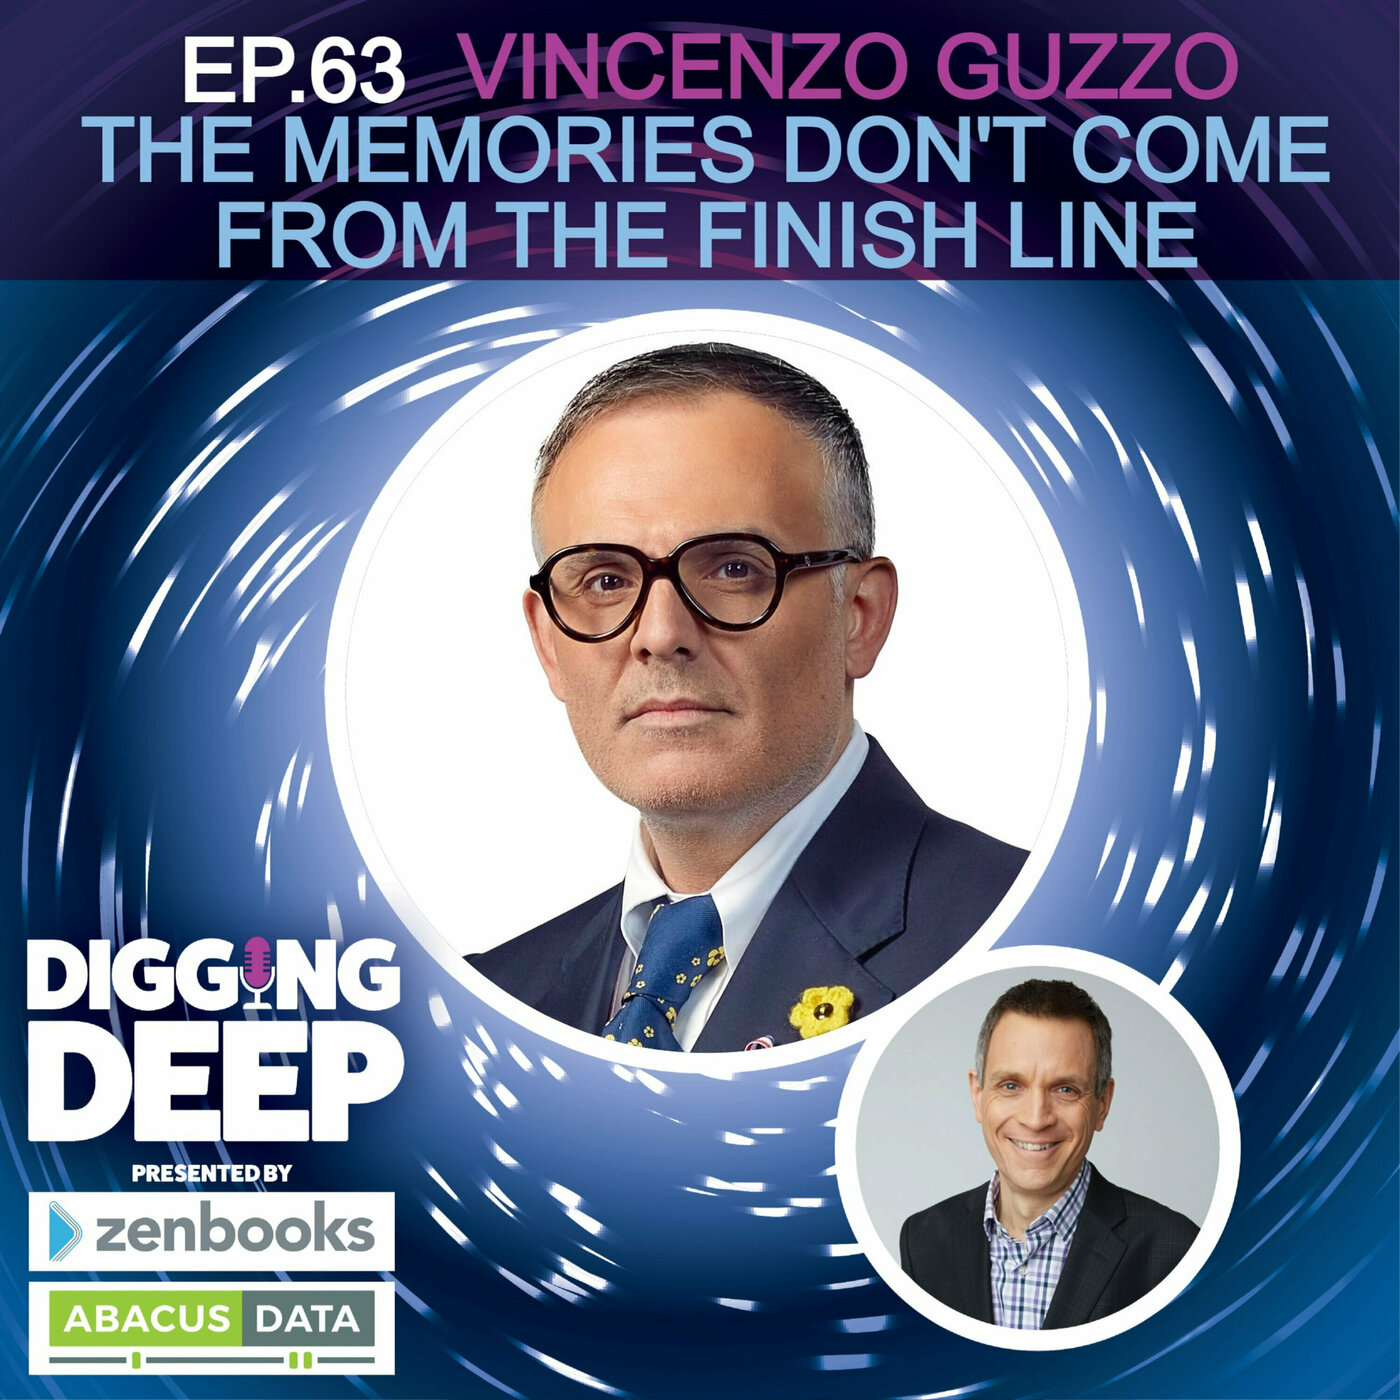 Vincenzo Guzzo: The Memories Don't Come from the Finish Line